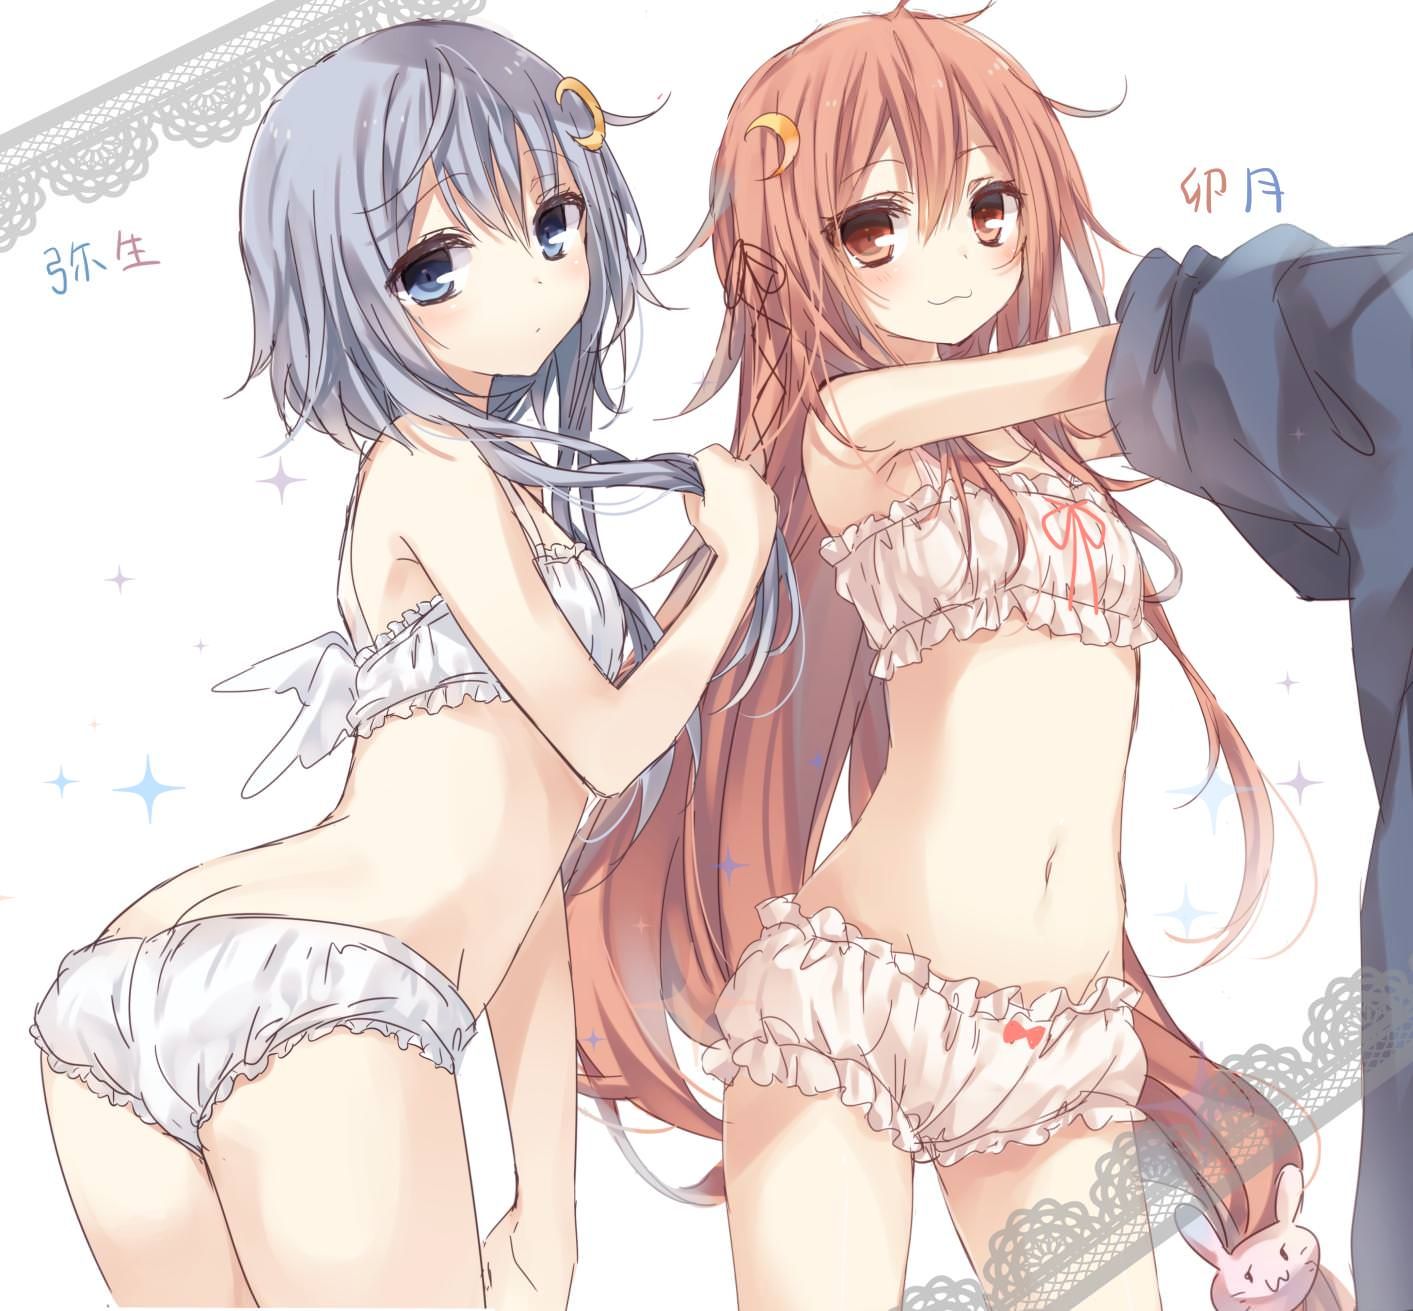 Corner wwwwwwwww excited by erotic illustrations of [ship this] after a long interval 3